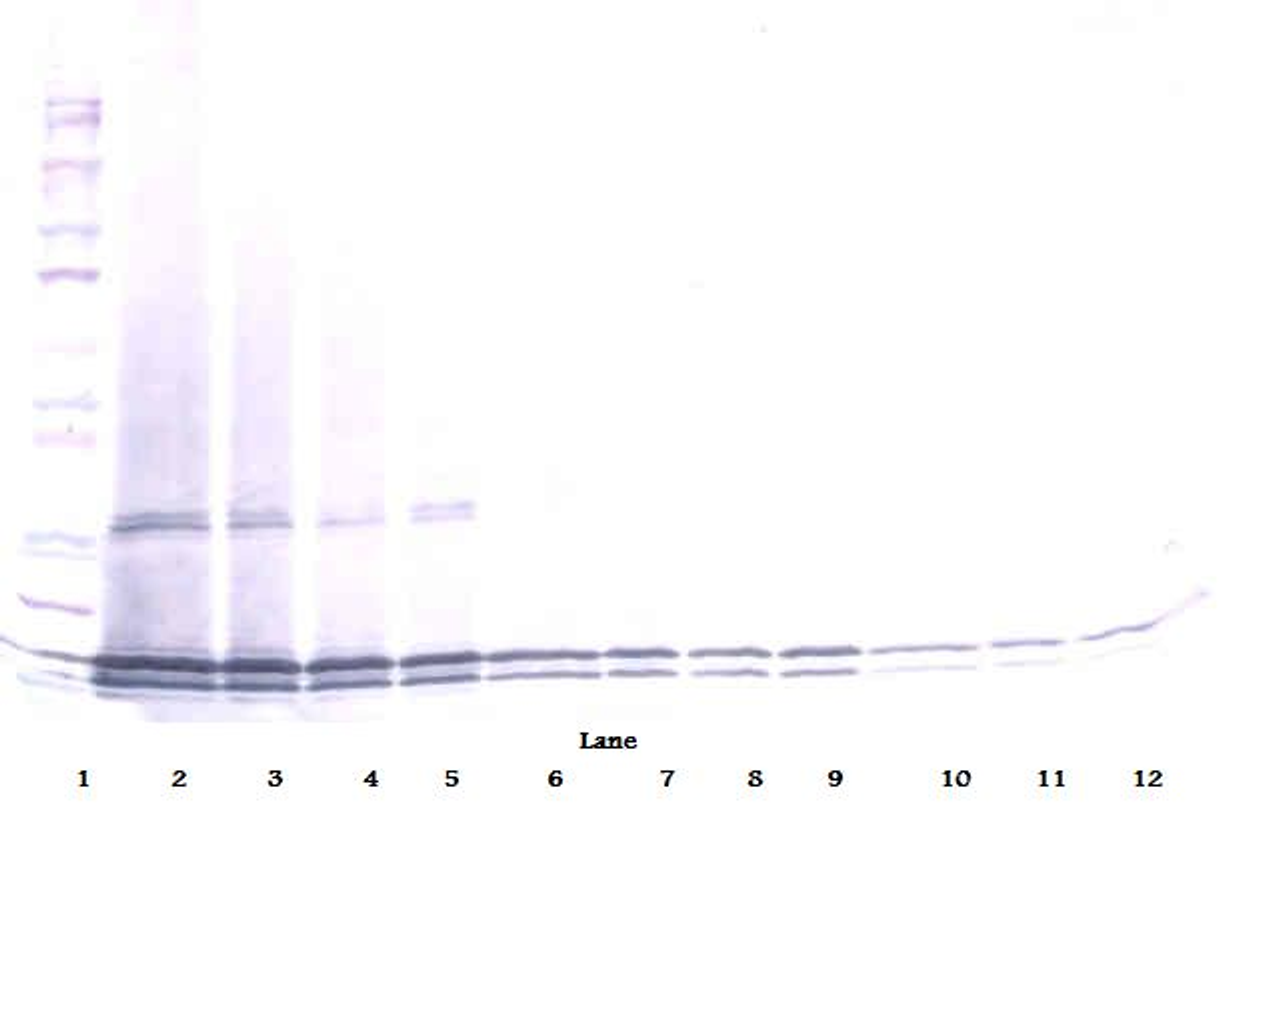 To detect hIL-17B by Western Blot analysis this antibody can be used at a concentration of 0.1 - 0.2 ug/ml. Used in conjunction with compatible secondary reagents the detection limit for recombinant hIL-17B is 1.5 - 3.0 ng/lane, under either reducing or non-reducing conditions.